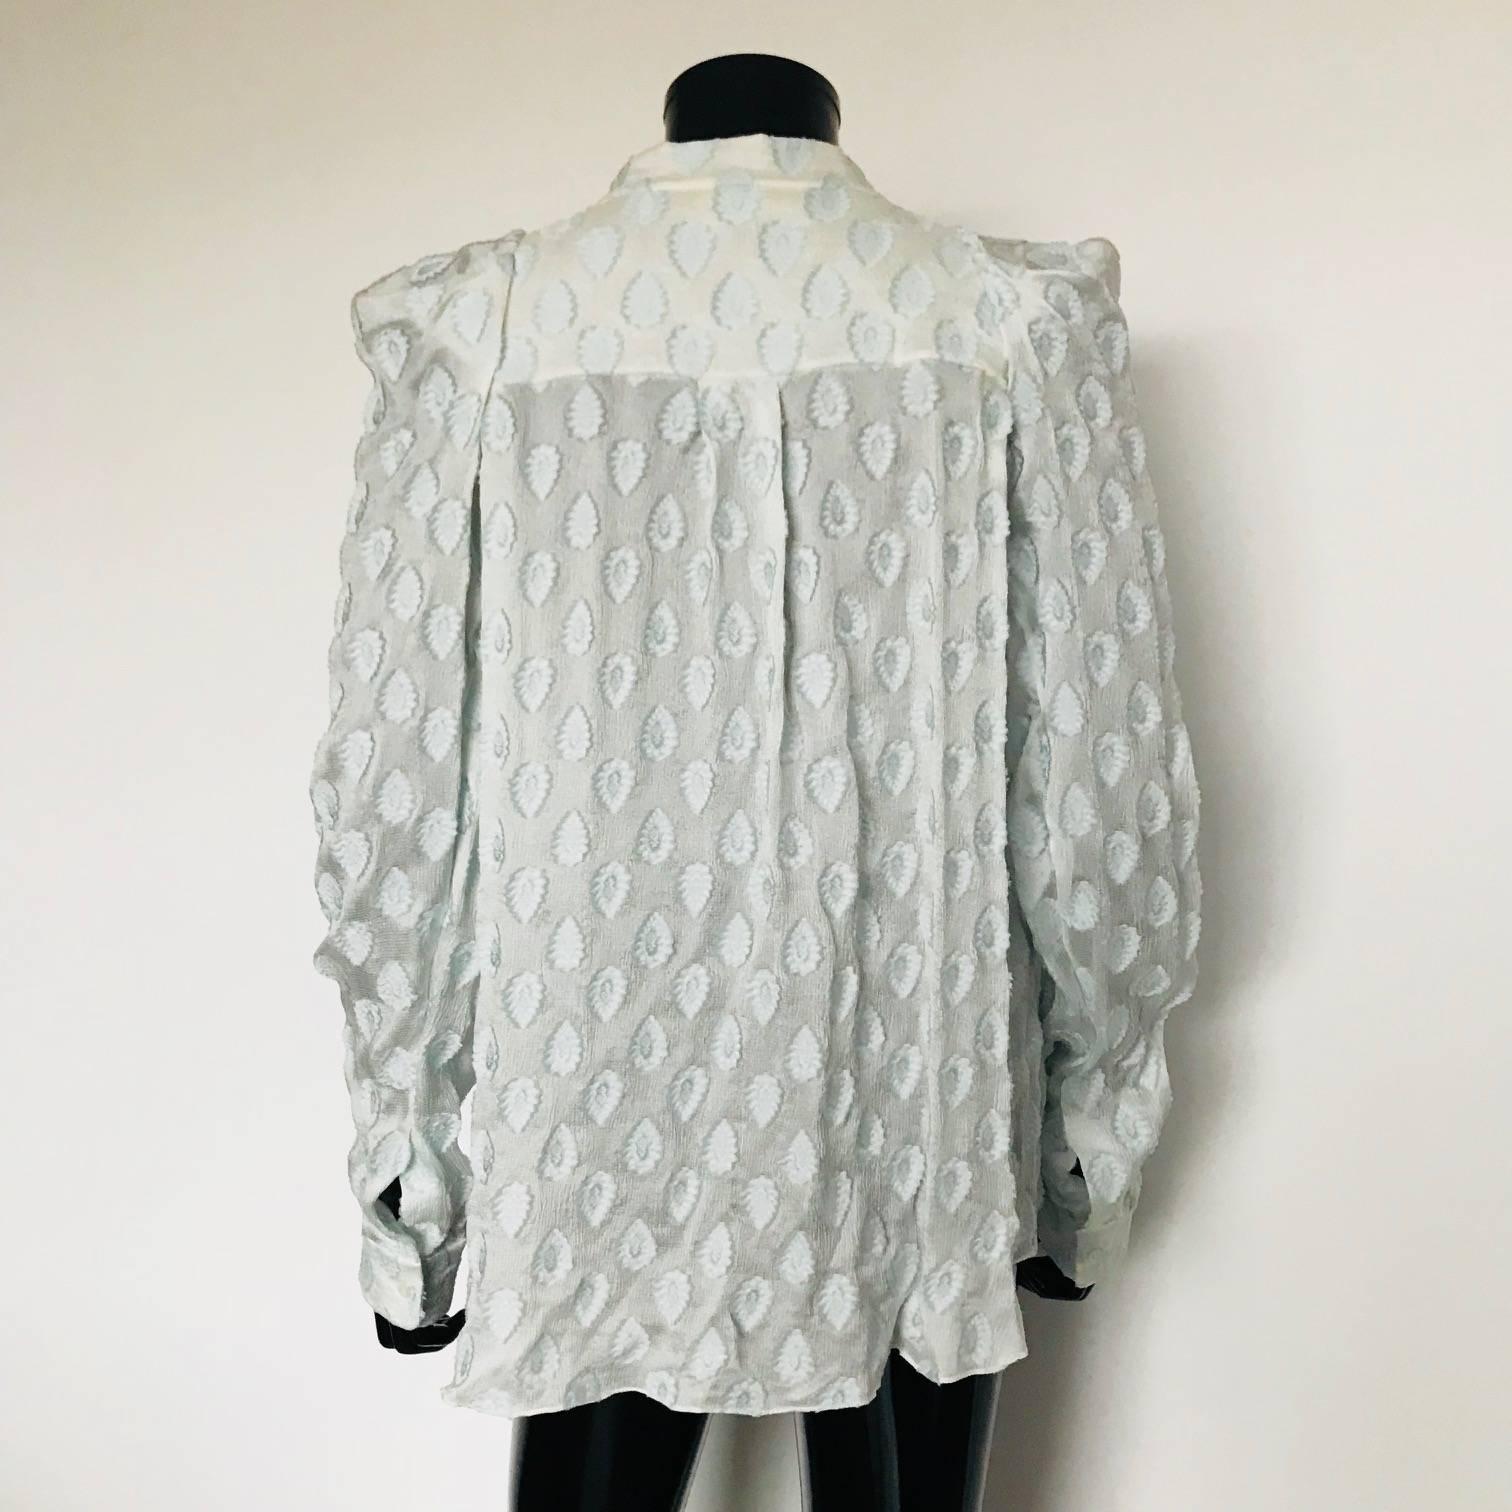 CHLOE blouse
Shirt in crepe silk, light blue, and patterns.
Long sleeves.